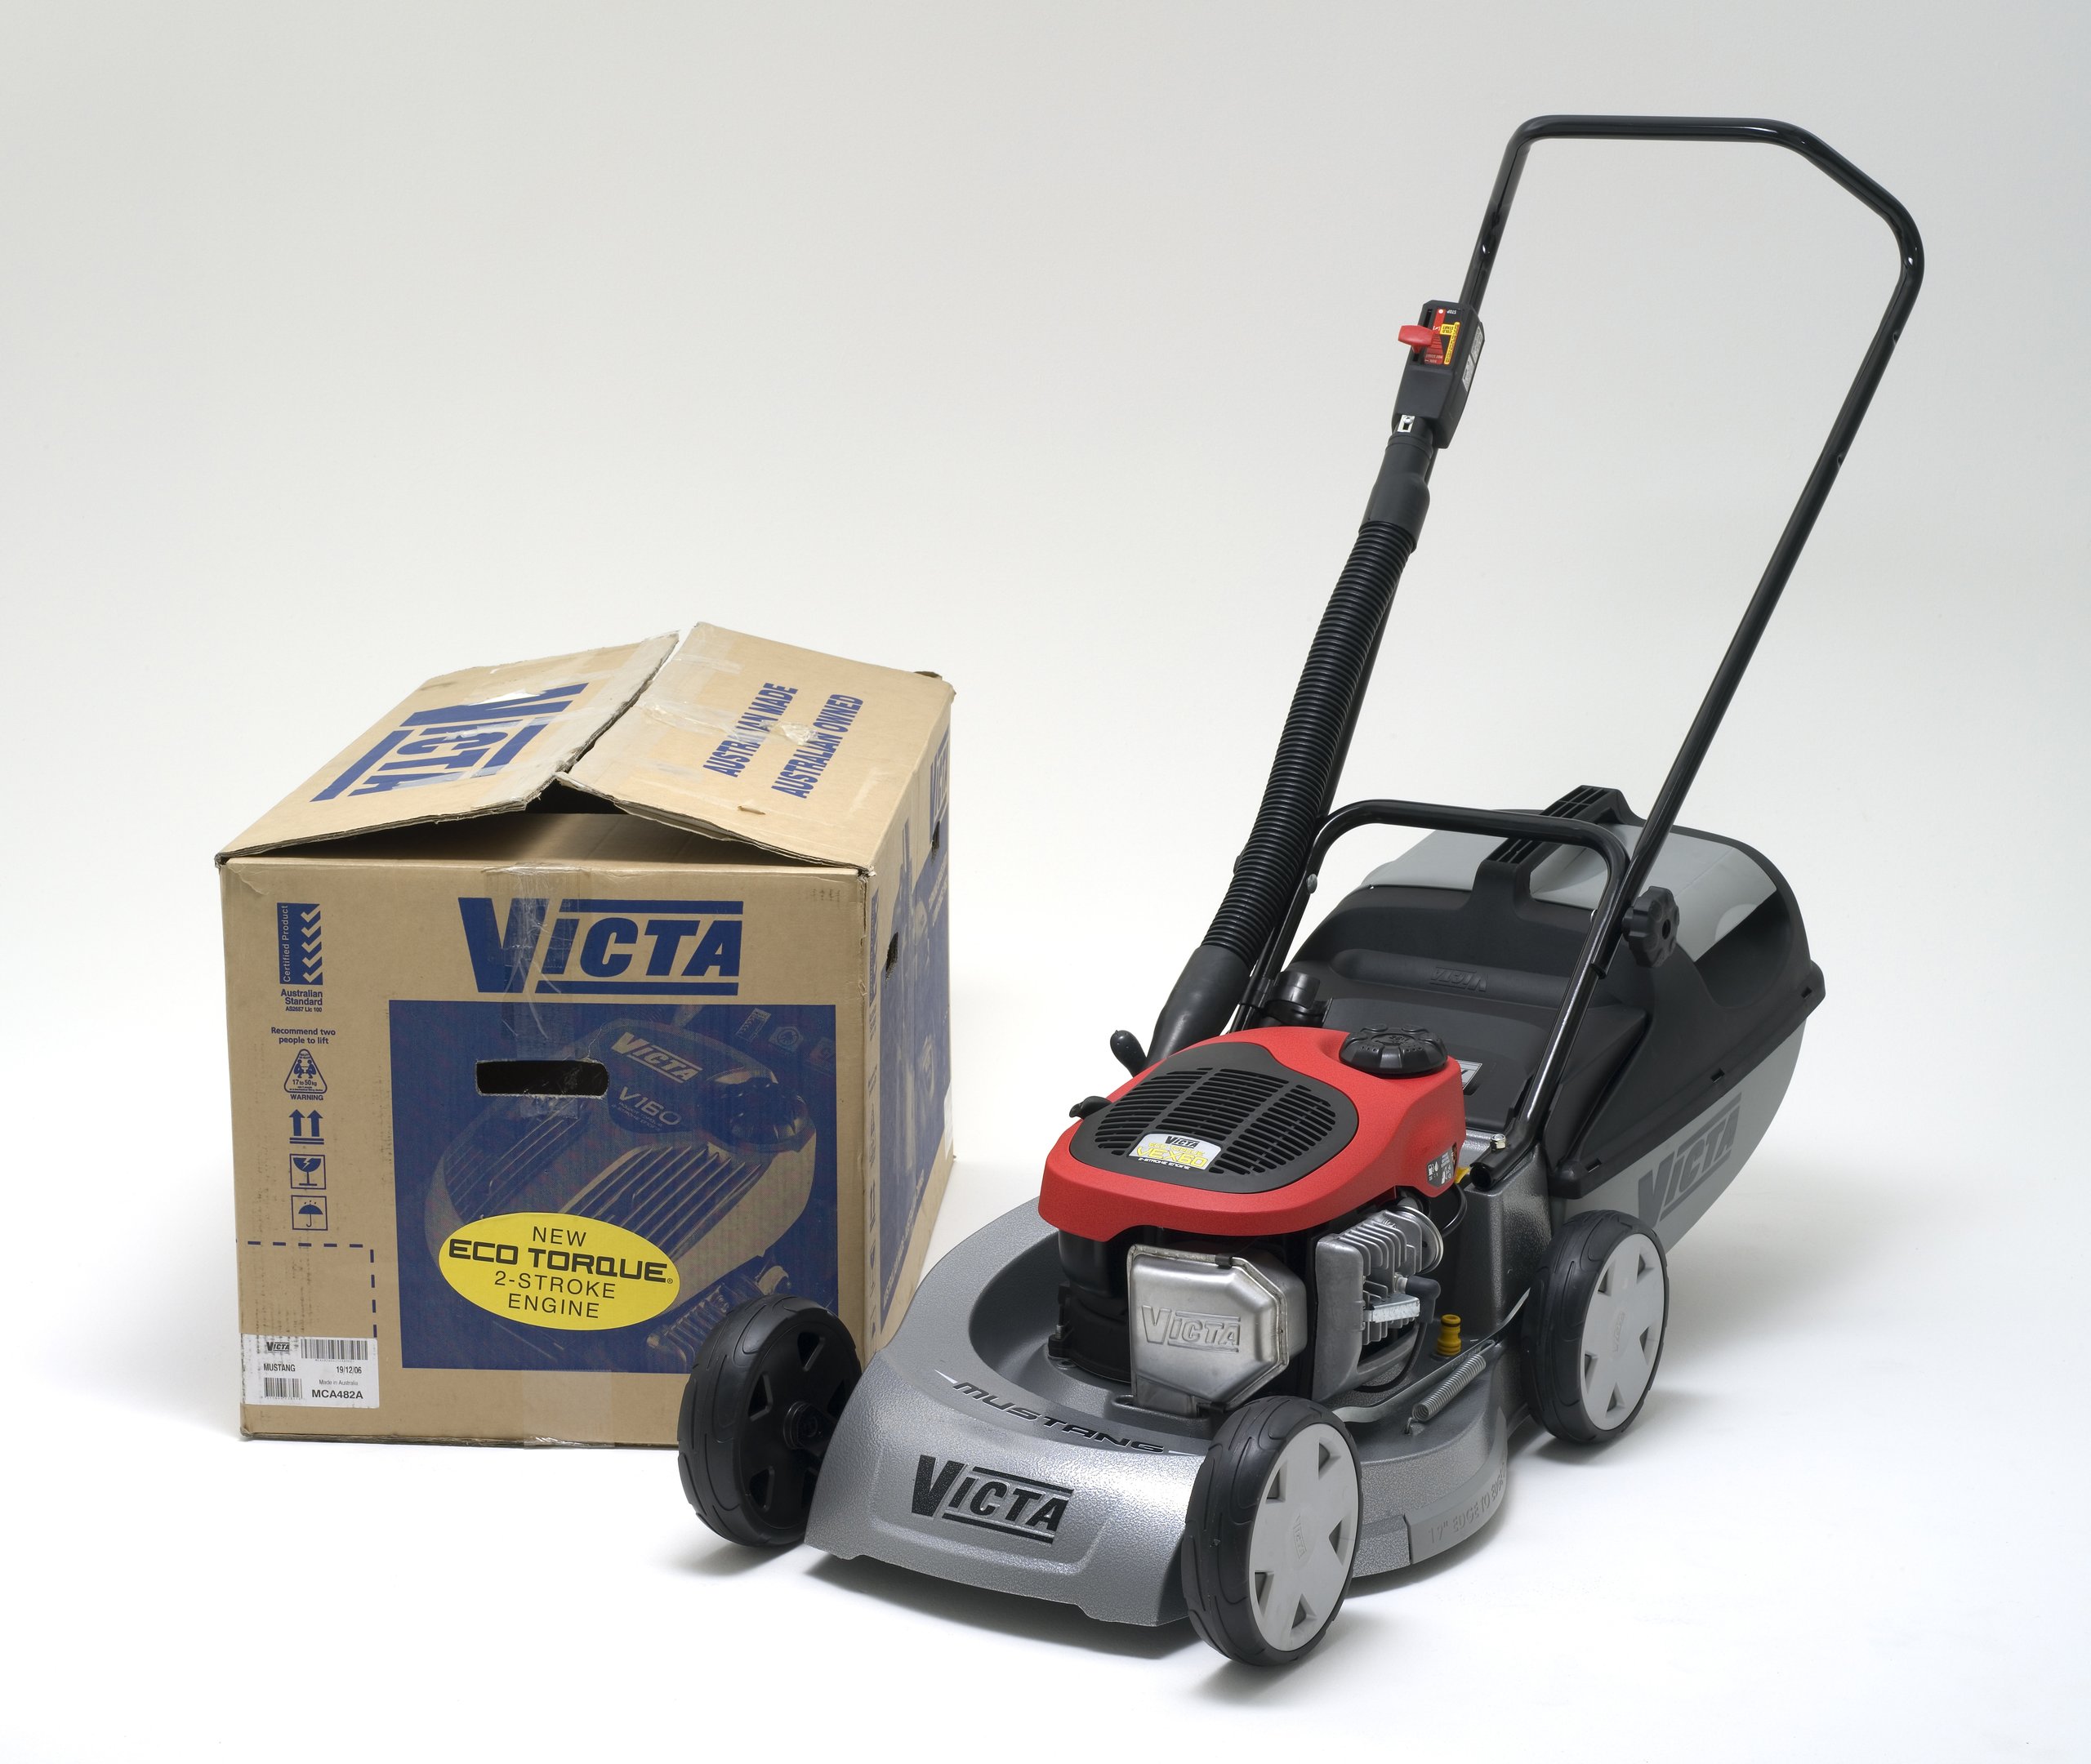 Victa Mustang lawnmower with Eco Torque engine and manuals